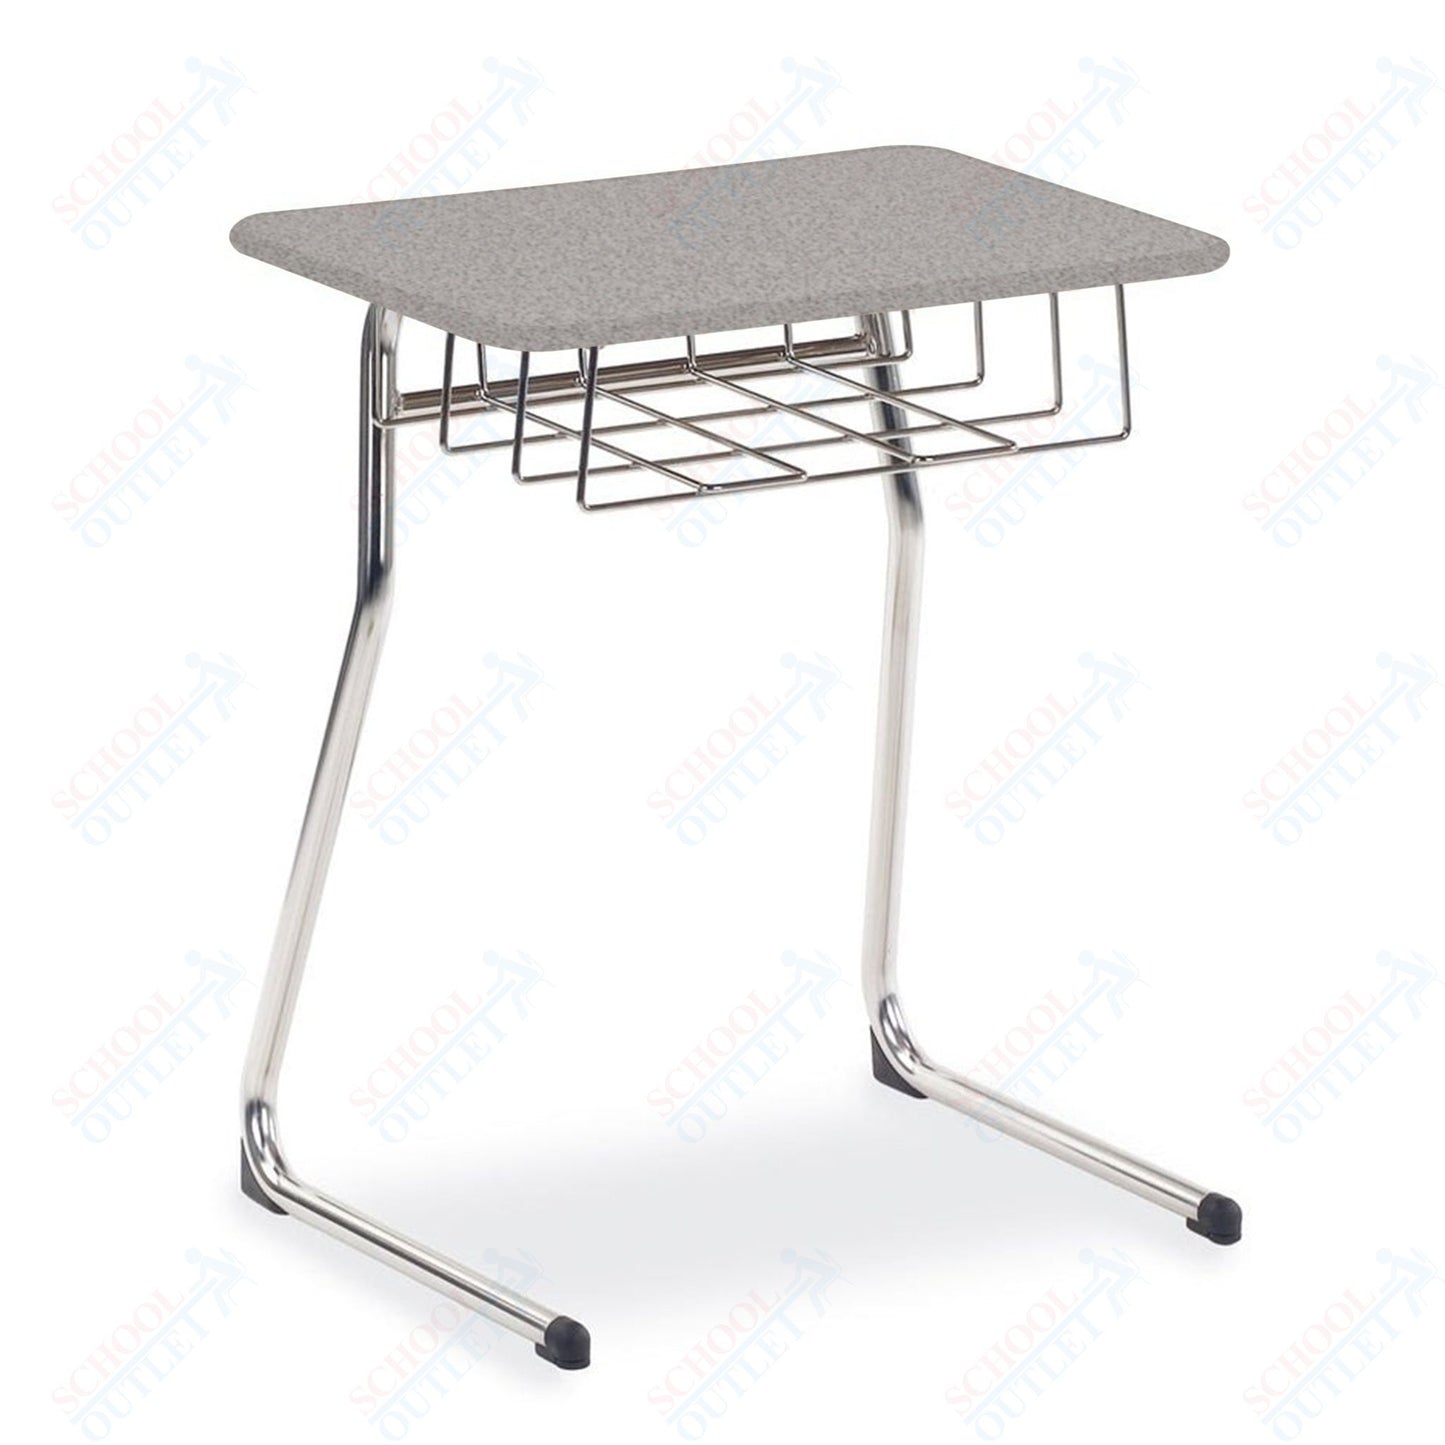 Virco Sigma Series 30" Fixed Height Student Desk, Cantilever Leg and 20" x 26" Top and Wire Book Basket (Virco 73330BR)